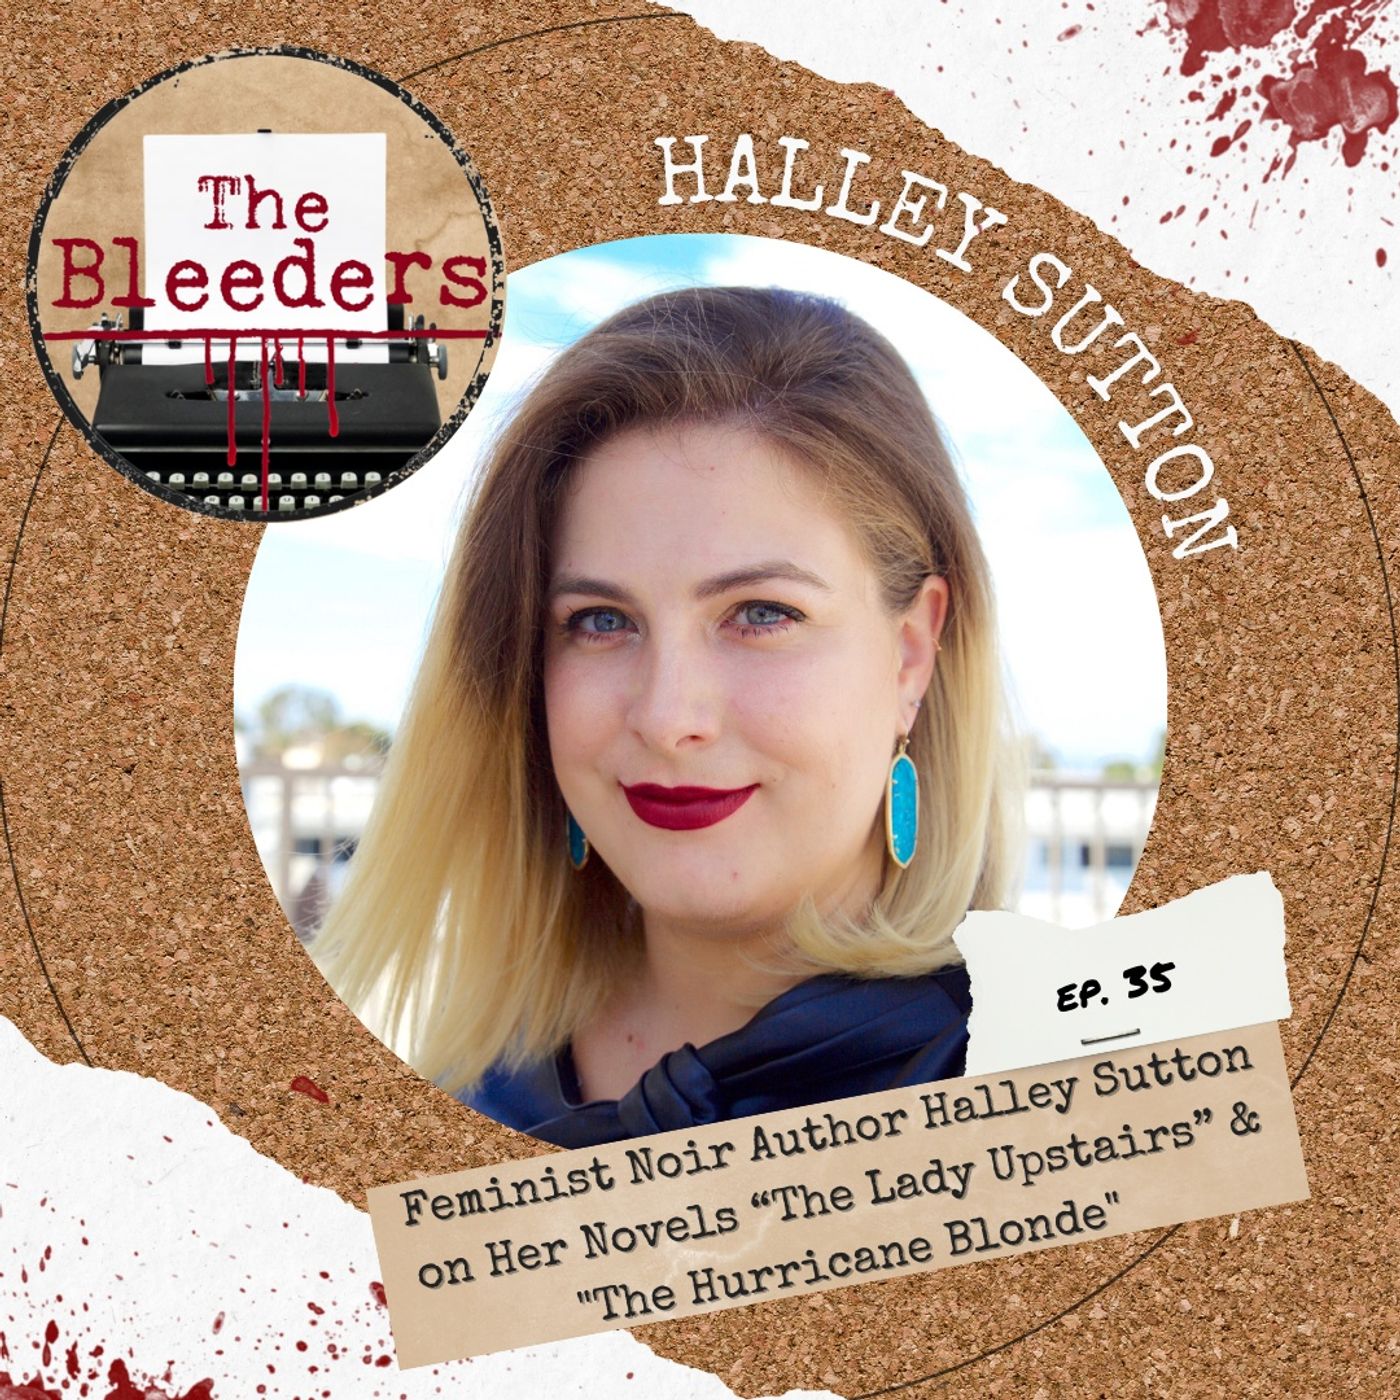 Feminist Noir Author Halley Sutton on Her Novels “The Lady Upstairs” & 